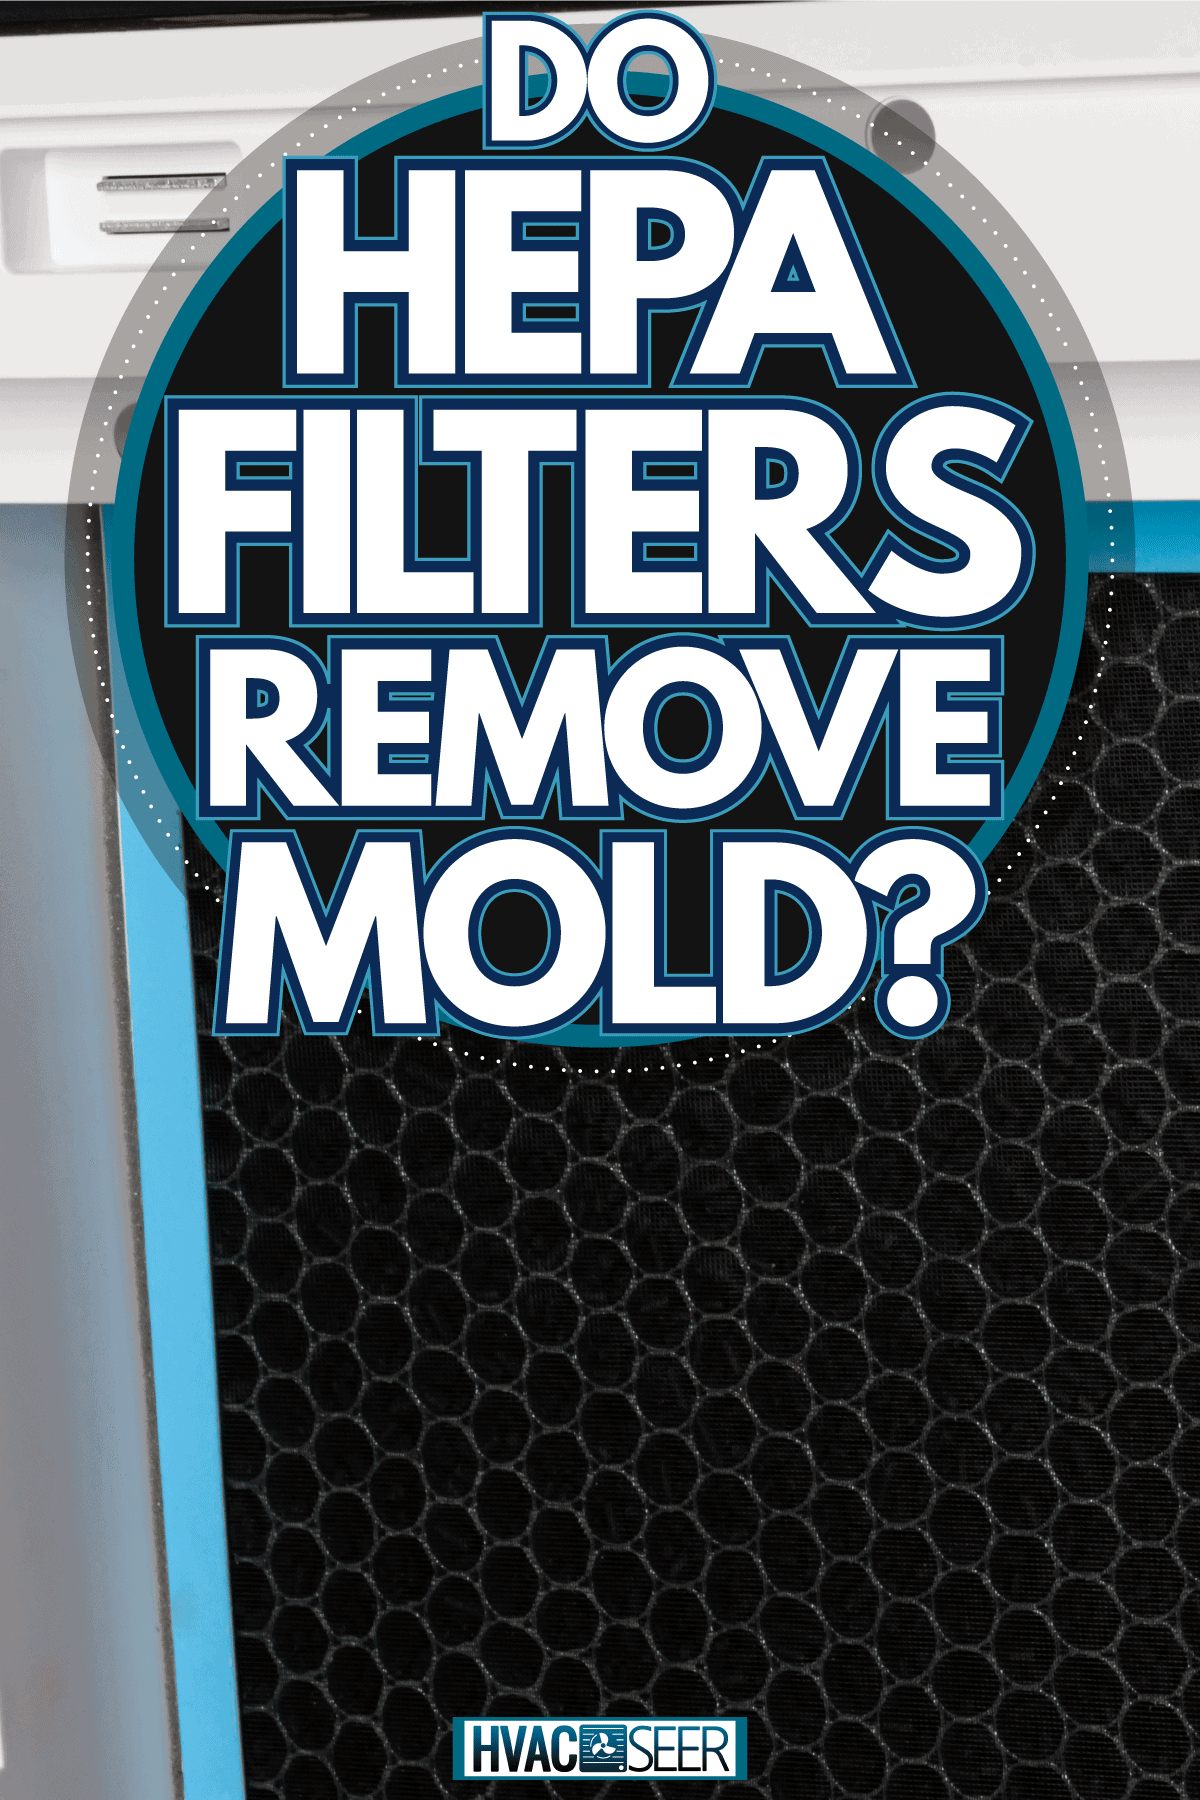 New HEPA filter replacement in the portable air conditioner, Do HEPA Filters Remove Mold?